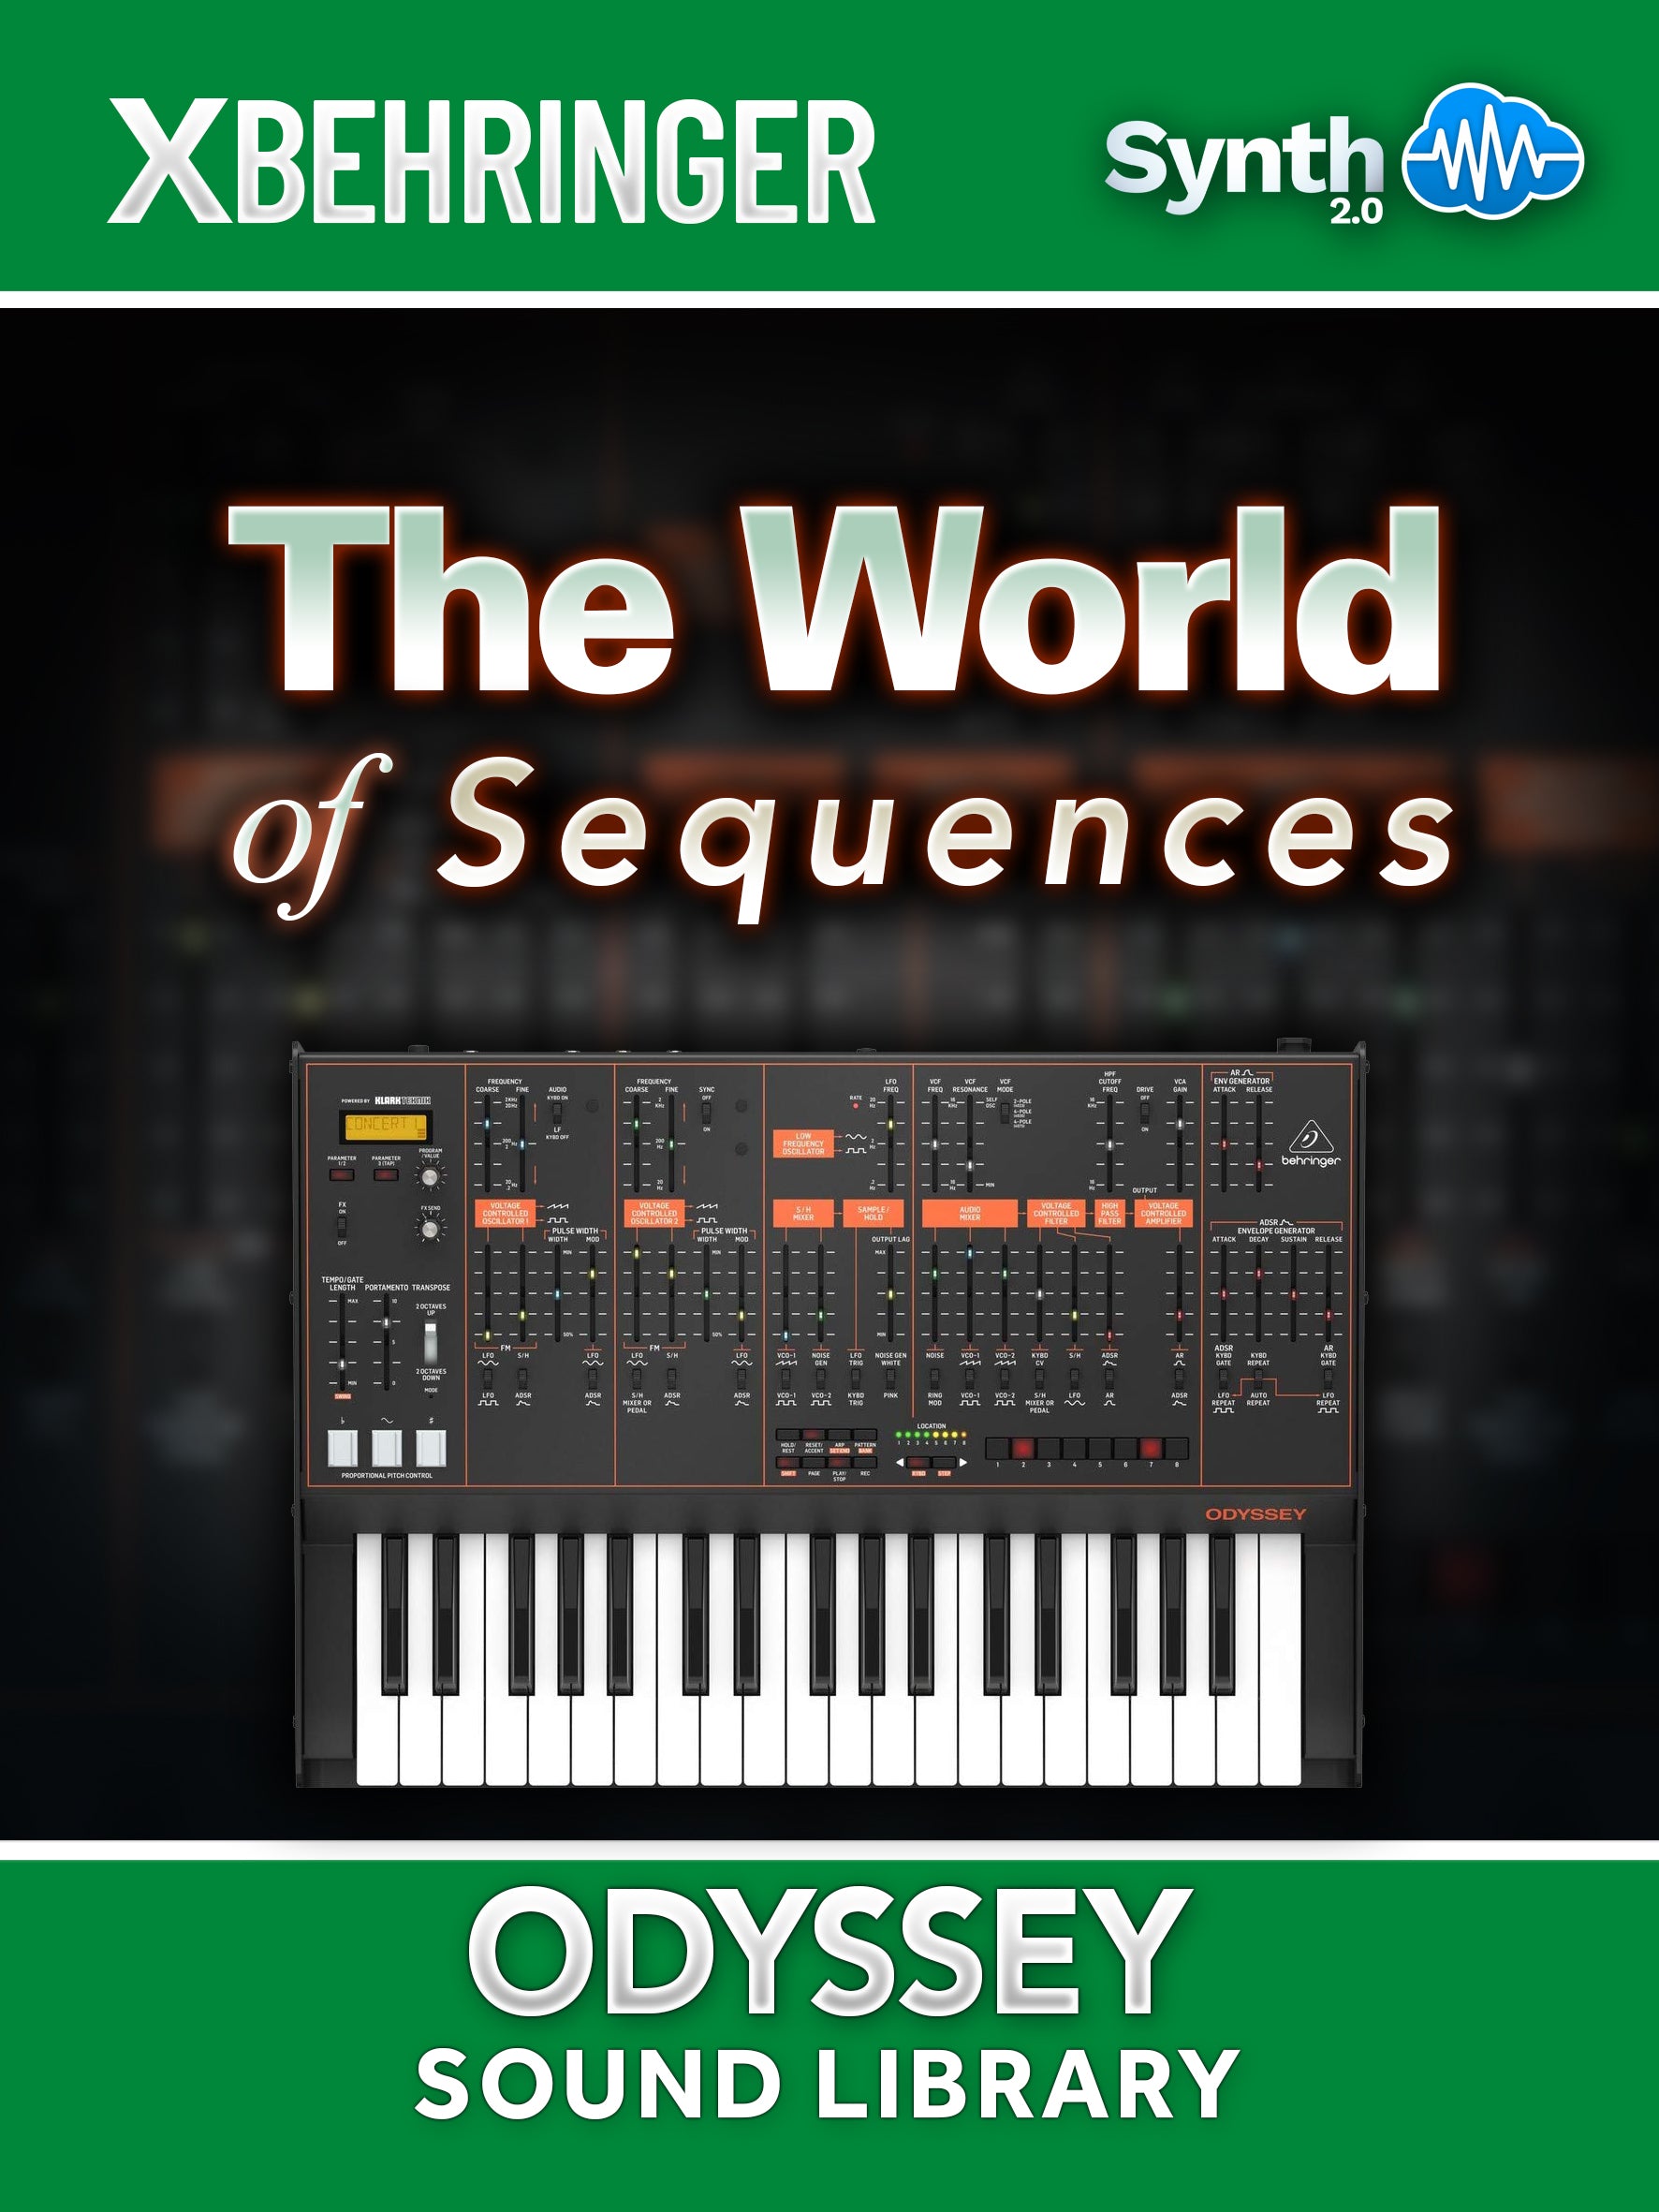 LFO074 - The world of sequences - Behringer Odyssey ( 64 patterns )